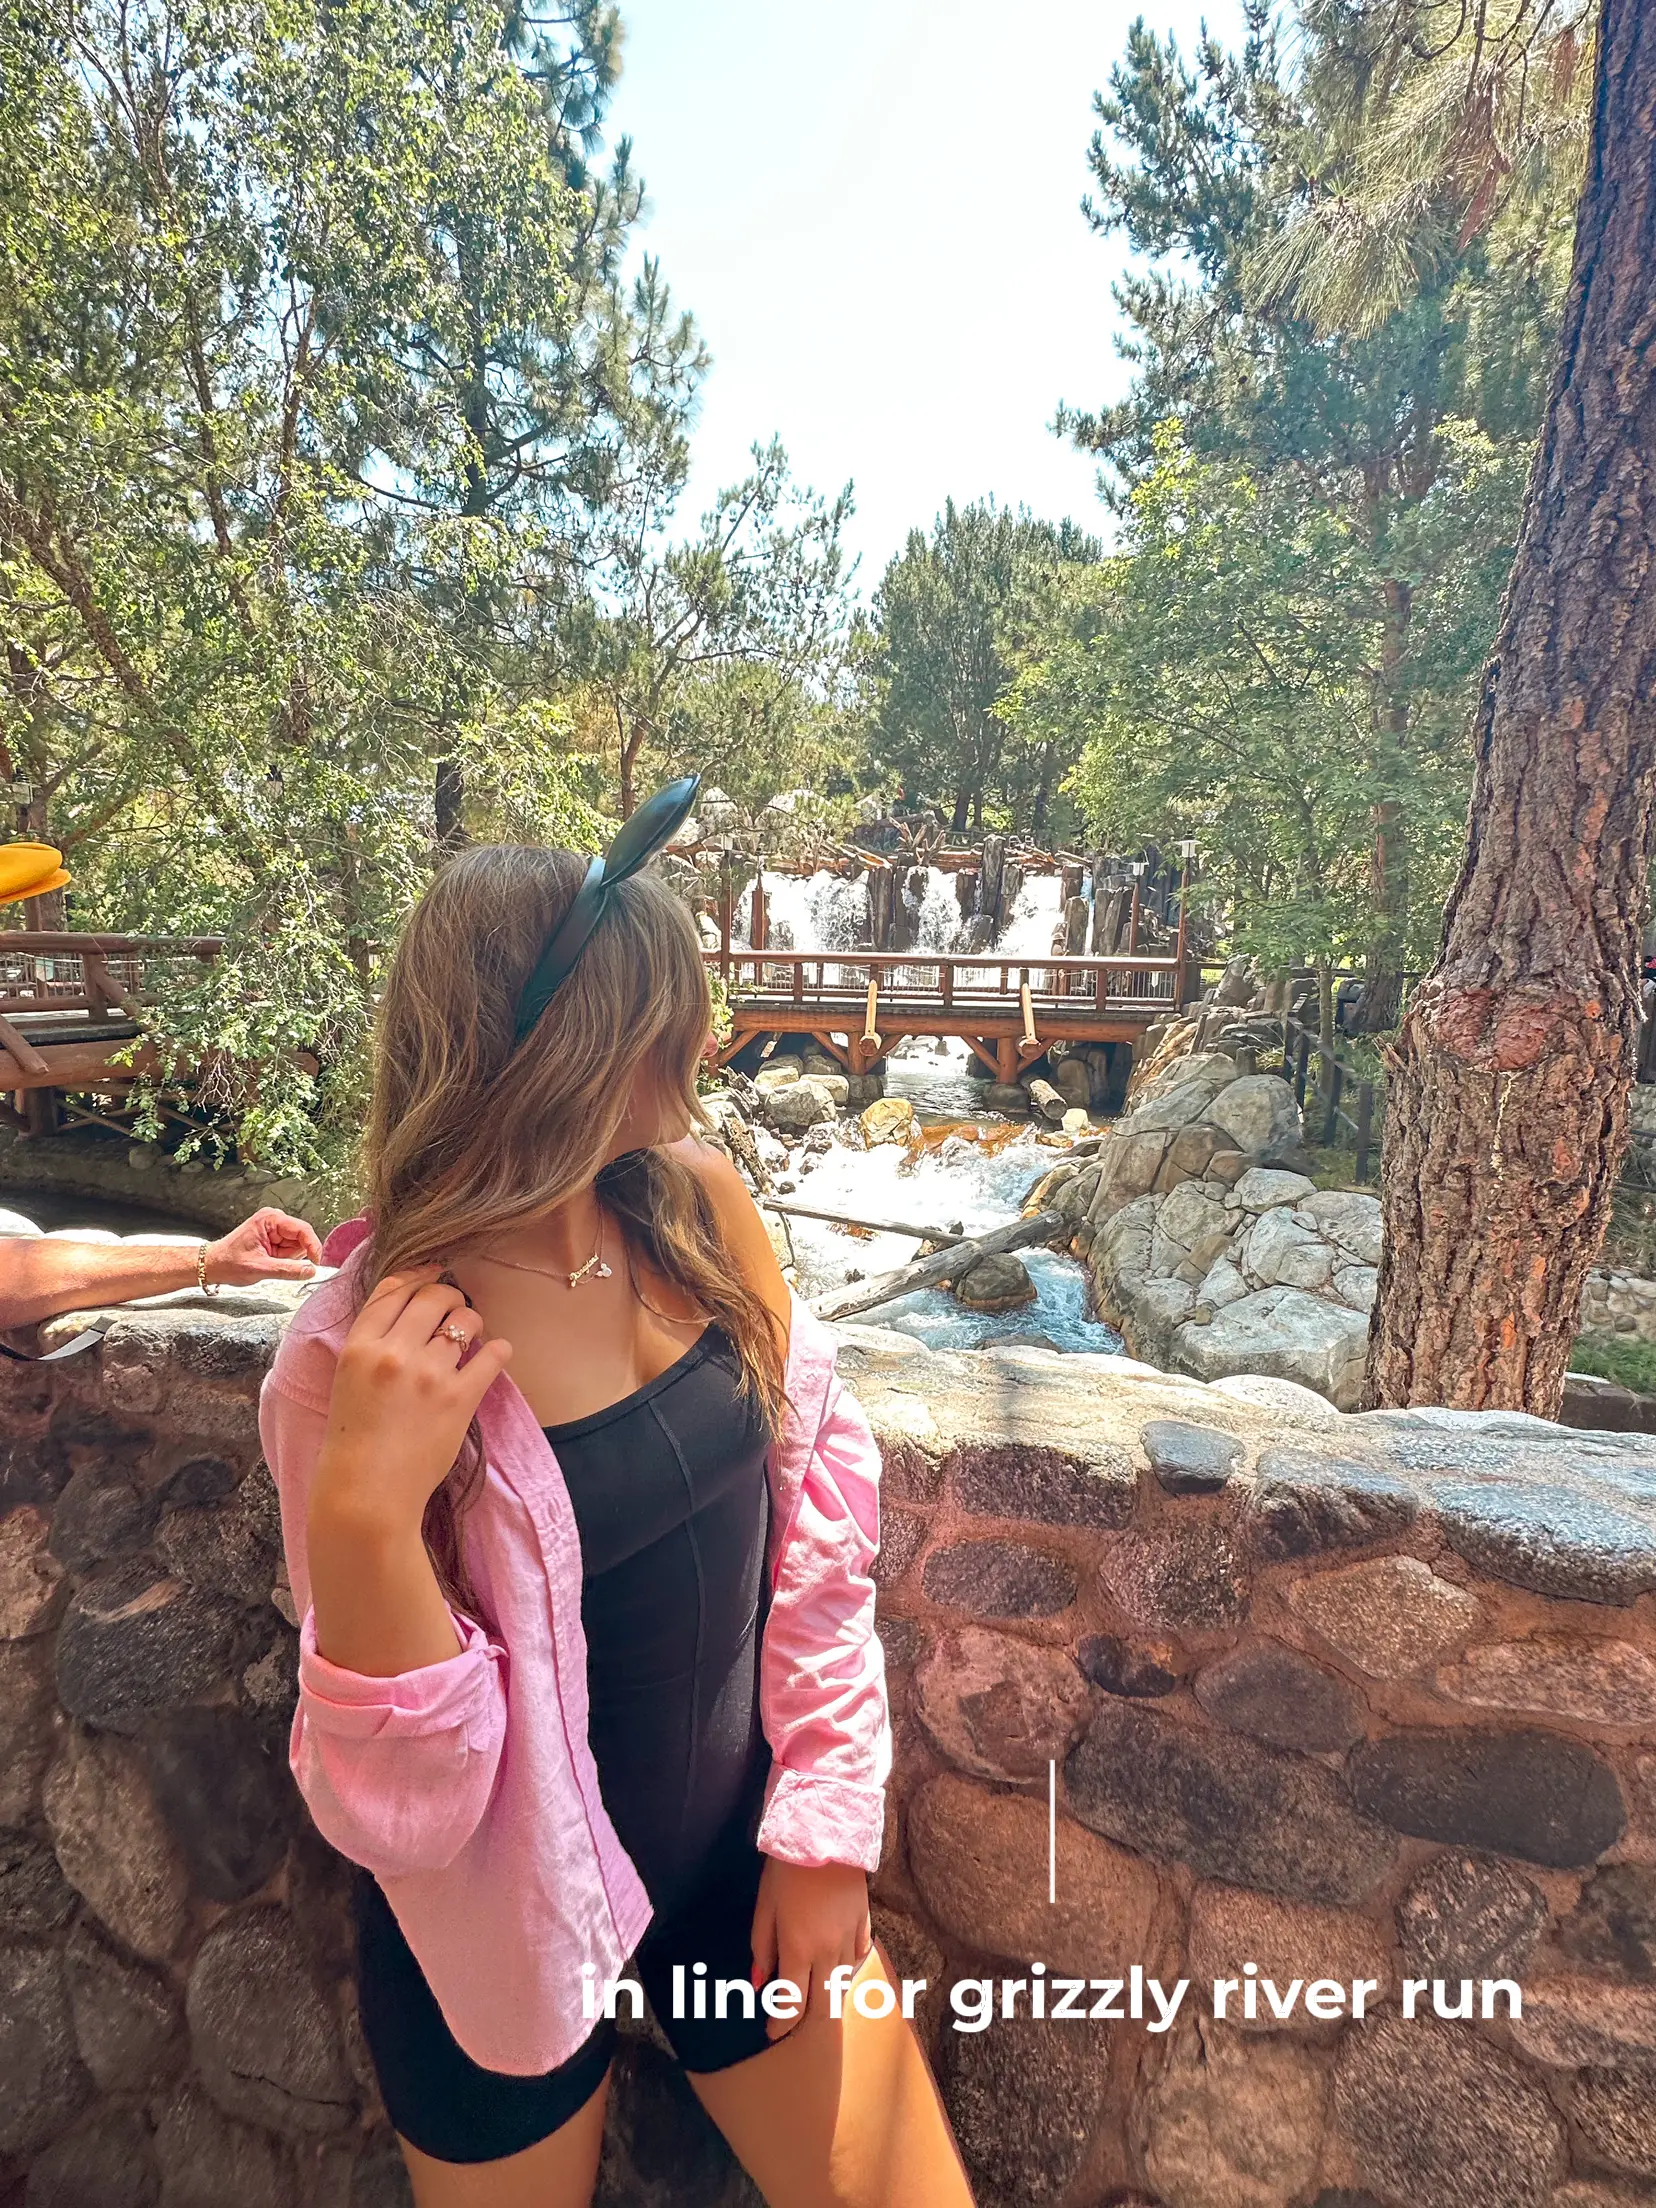  A woman wearing a pink jacket and black shorts is standing in front of a brick wall. She is wearing a hat and has a backpack on. The words "in line for grizzly river run"